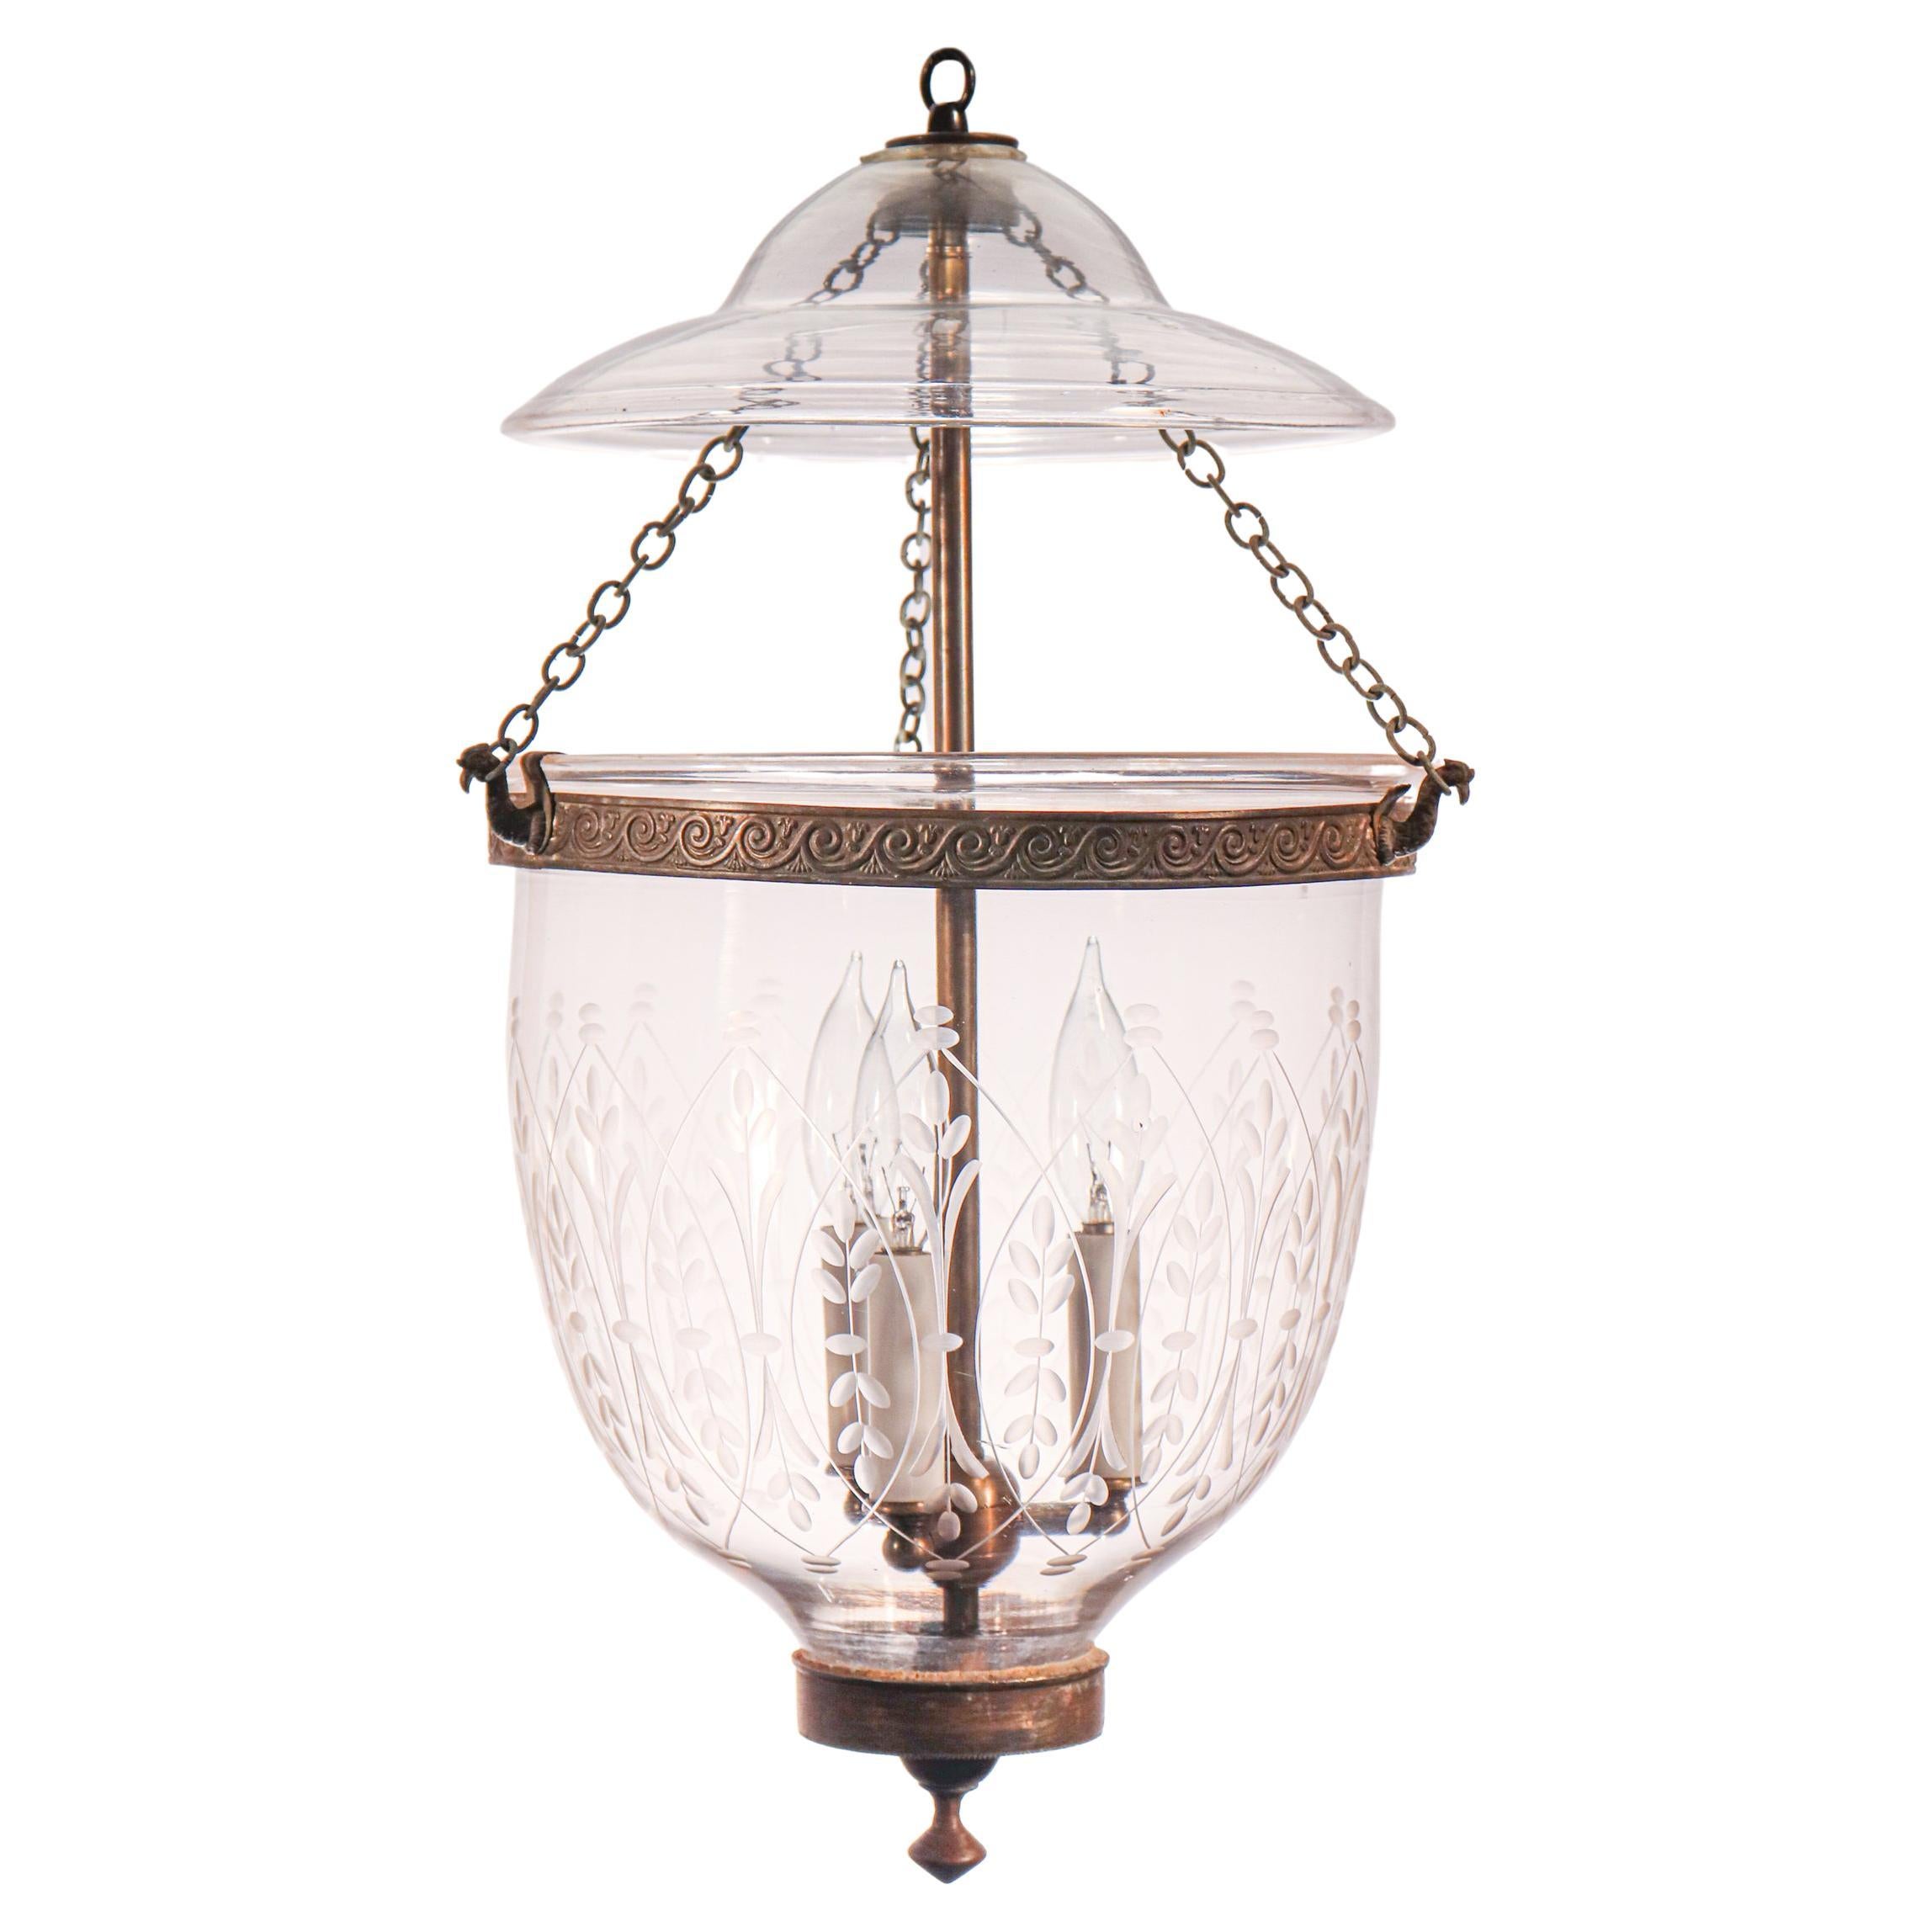 Antique Bell Jar Lantern with Wheat Etching